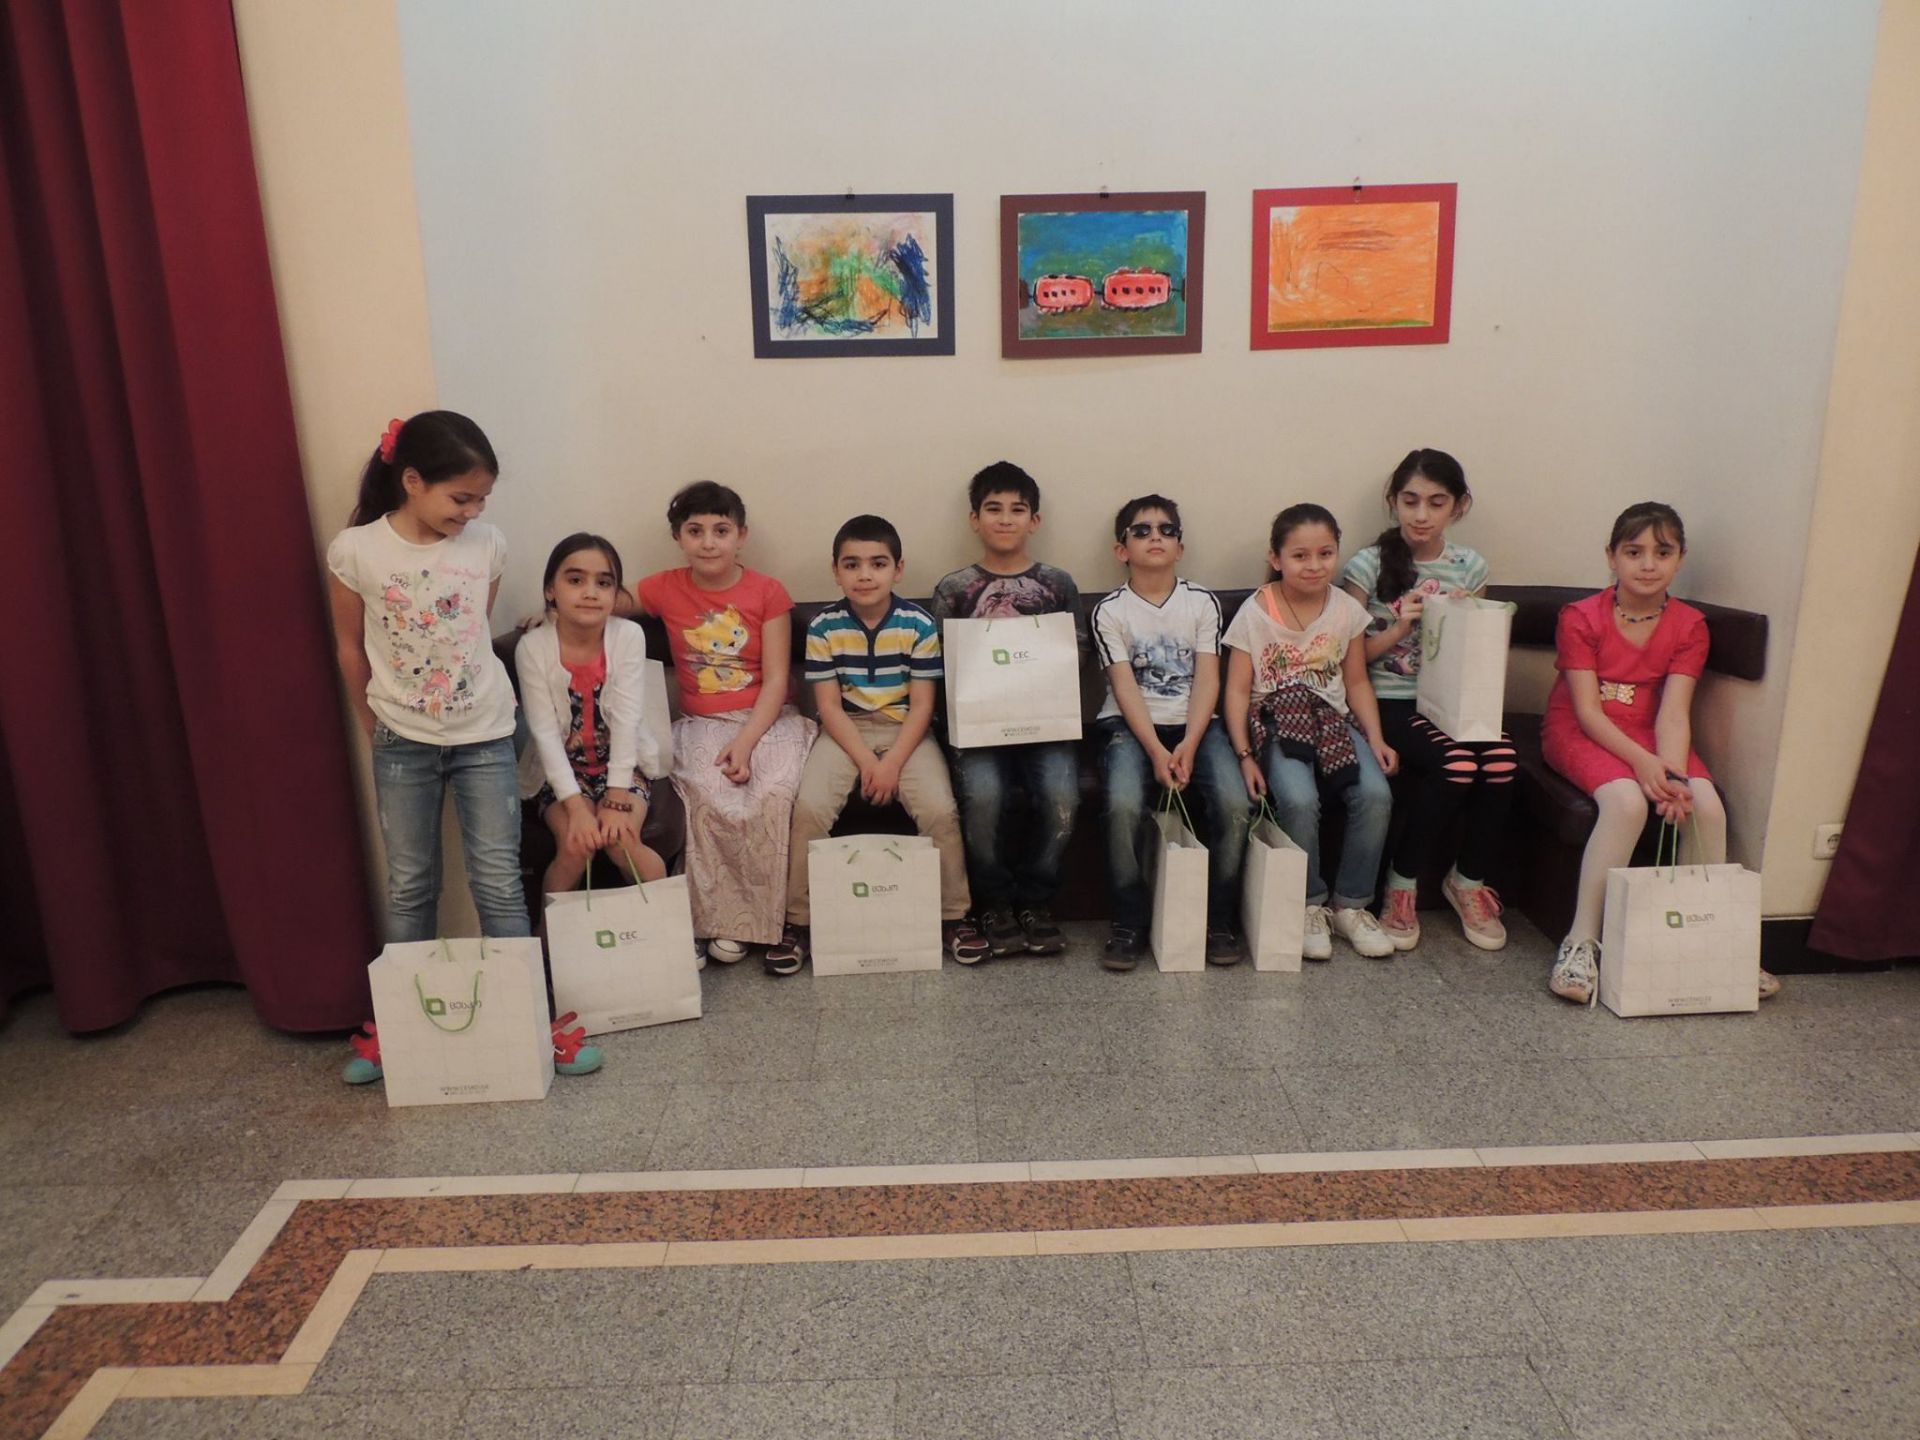 They congratulated our children with the International Children’s Day image